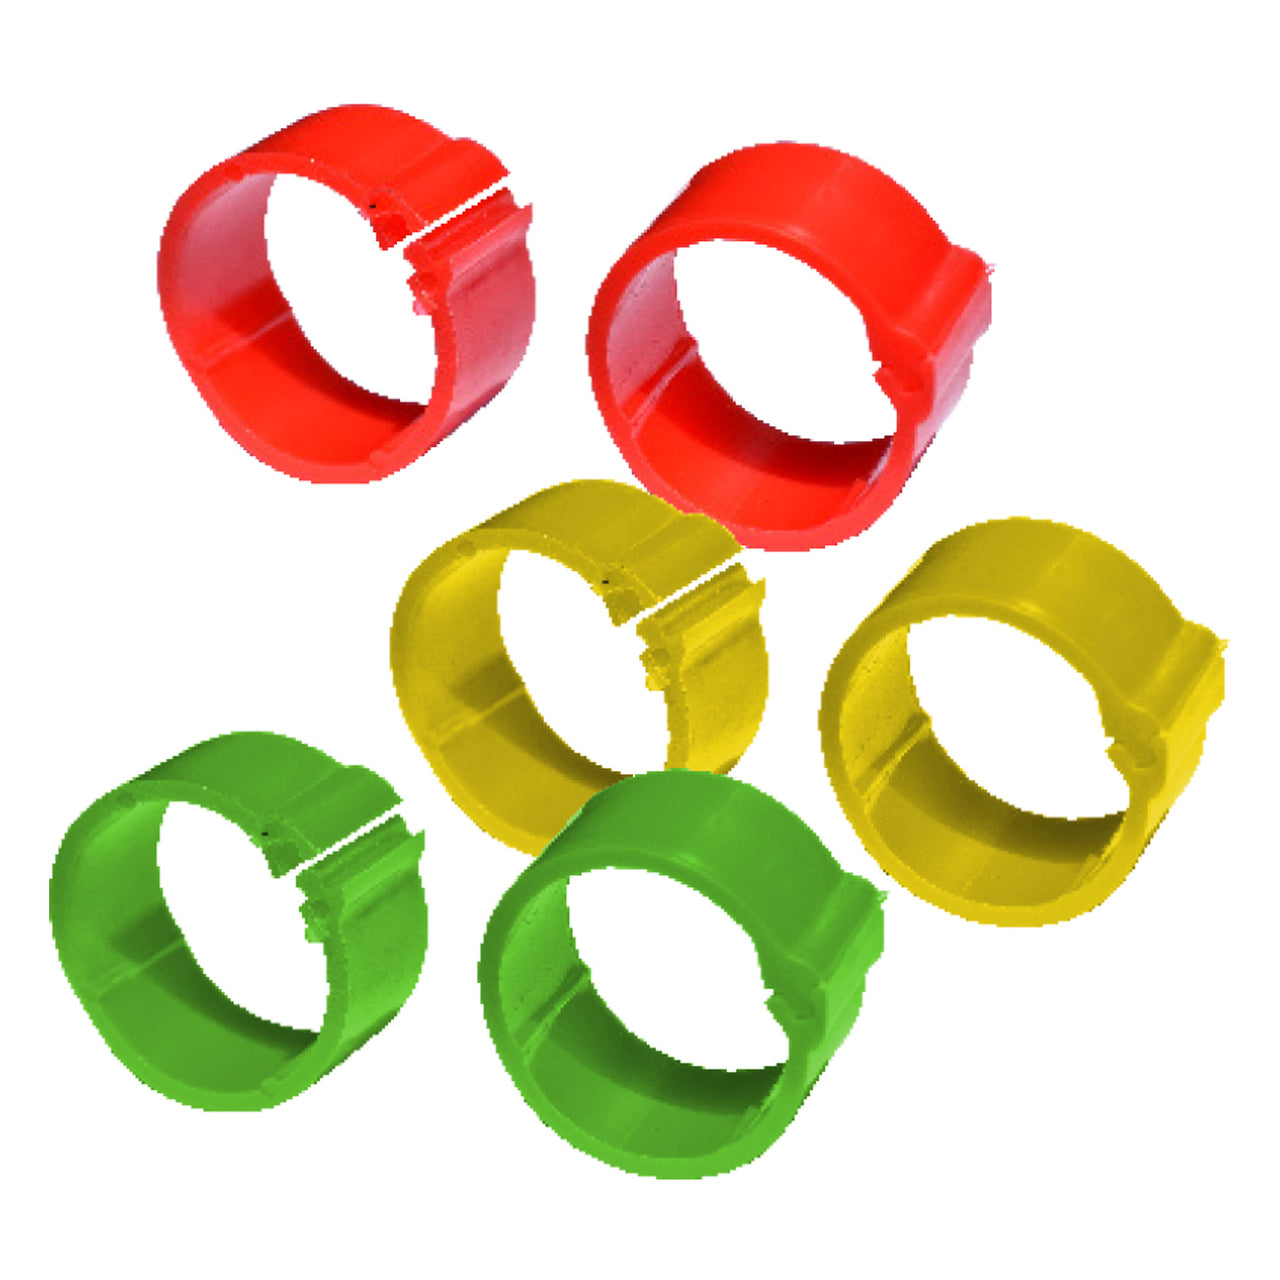 Tuff Stuff Poultry Ring Assorted Colours - Medium (100 Pack) - Poultry Rings Tuff Stuff - Canada